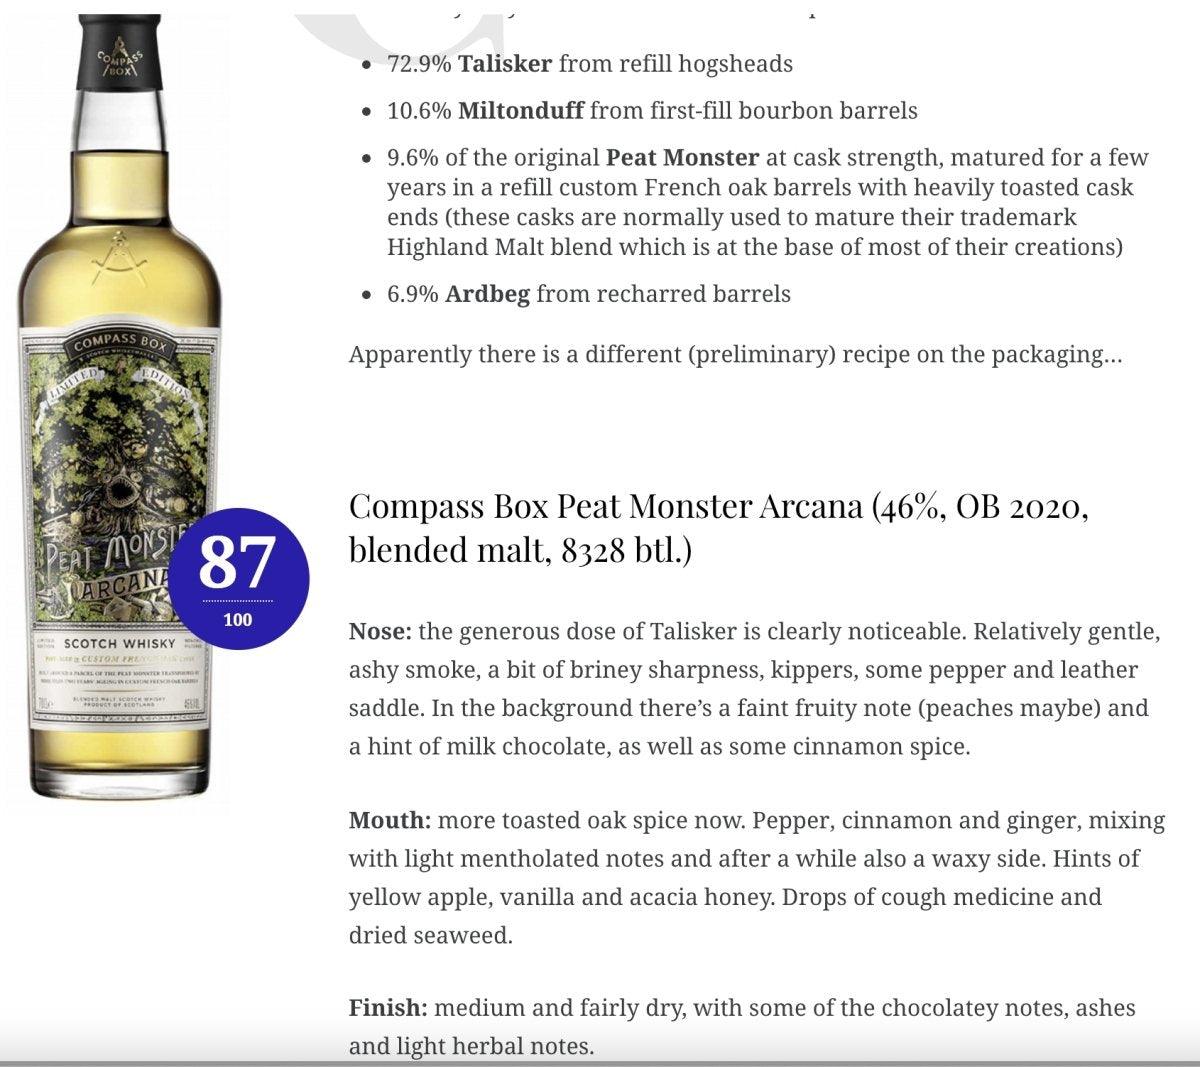 Compass Box - Peat Monster Arcana - Scotch Whisky - Country_Scotland - Distillery_Blended - _Compass Box 威士忌